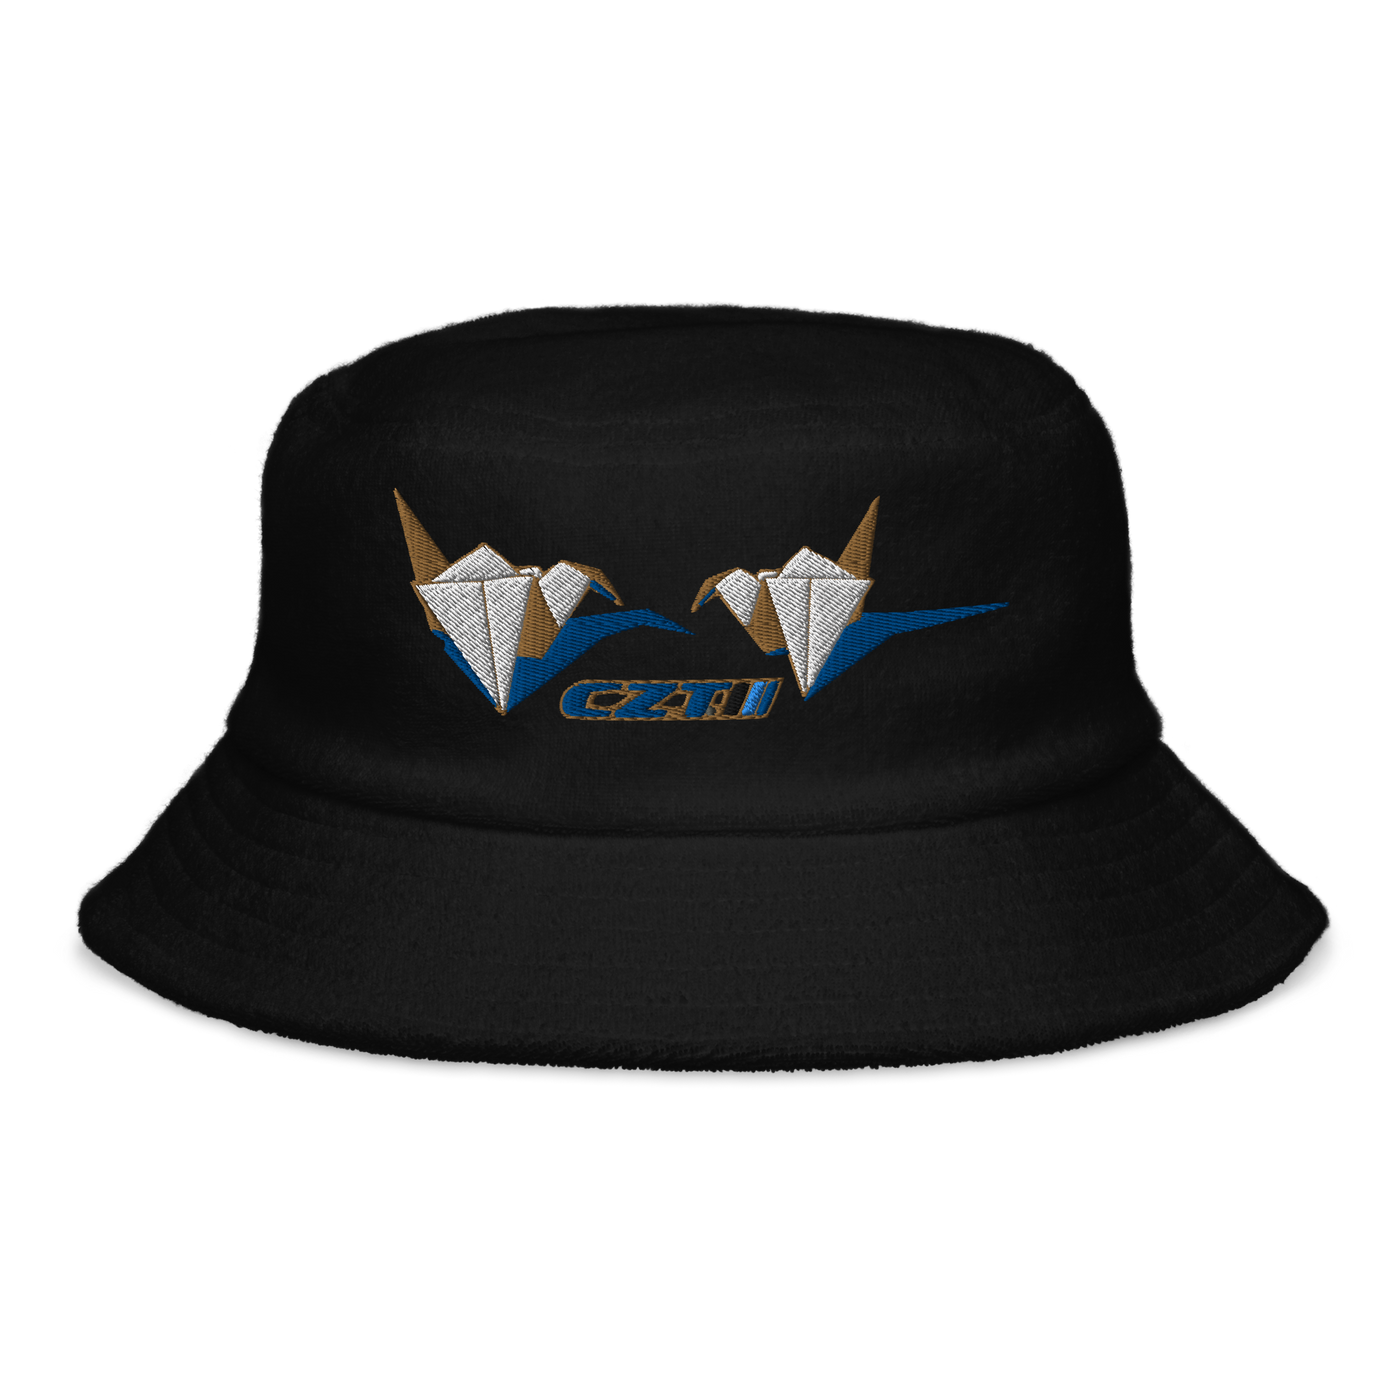 CZT ORIGAMI Terry Session Drop Bucket Hat (Organic)